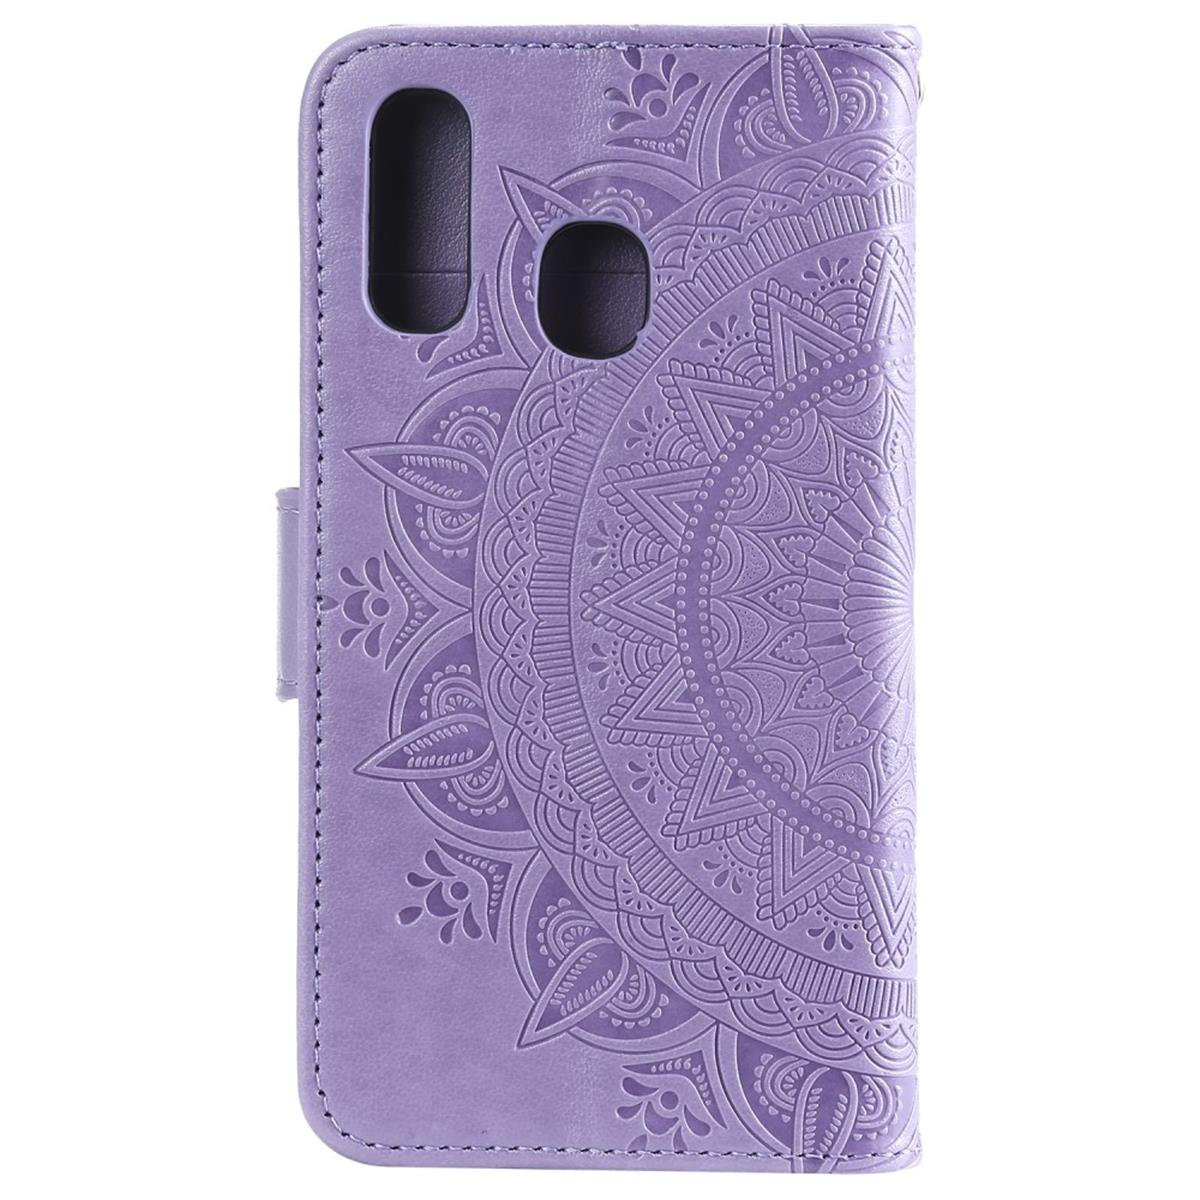 Muster, Klapphülle Galaxy A40, Bookcover, mit COVERKINGZ Lila Mandala Samsung,